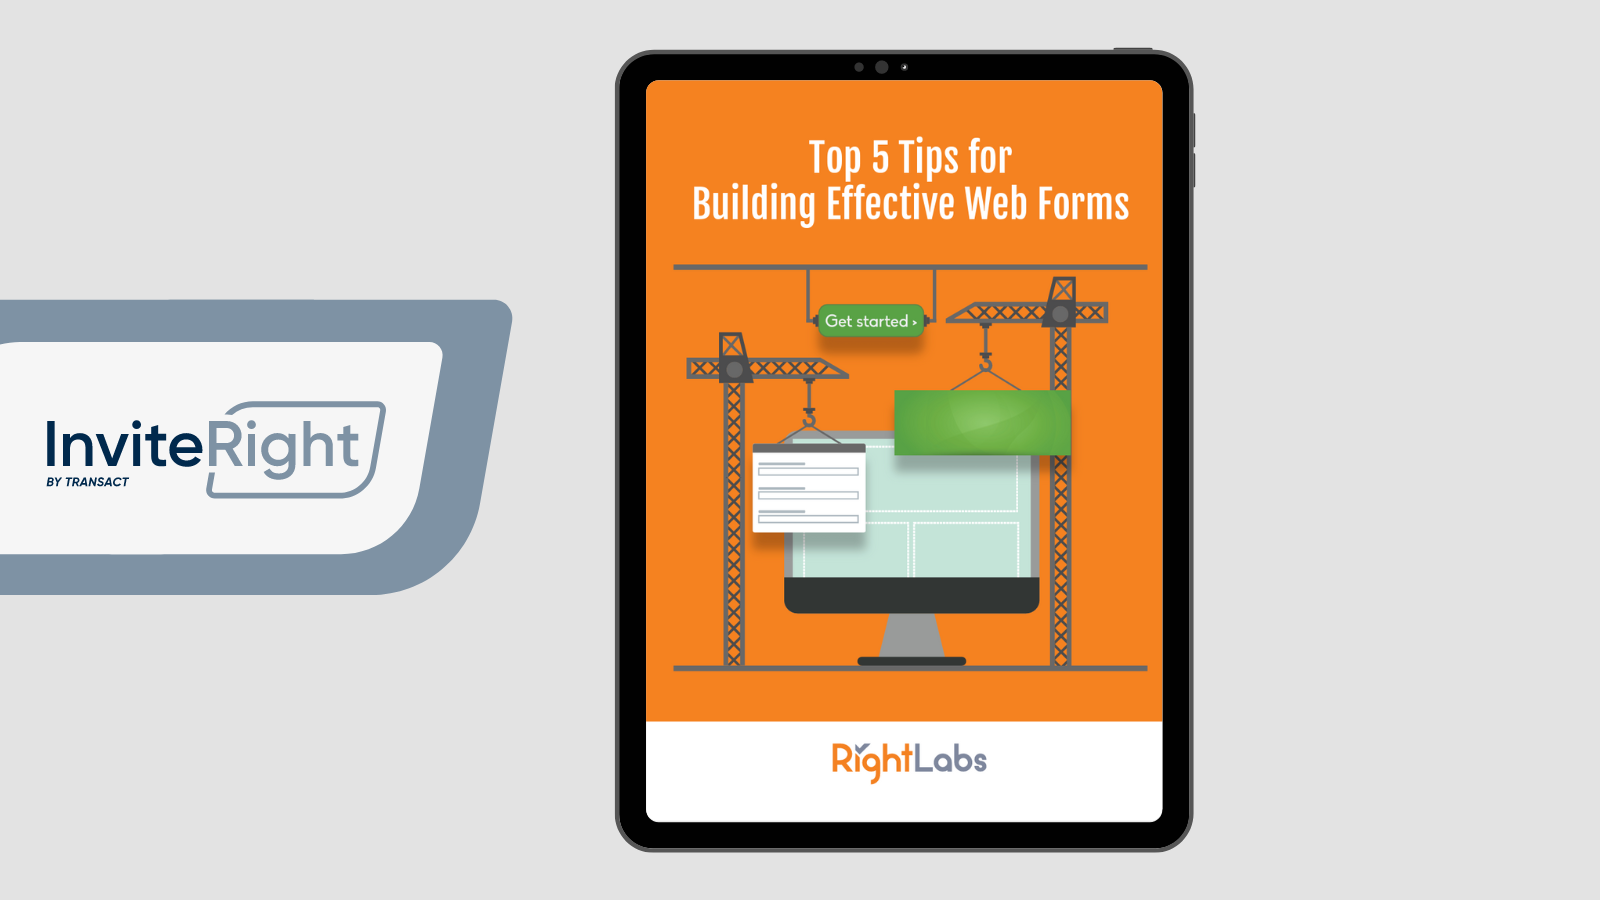 Top 5 Tips for Building Effective Web Forms